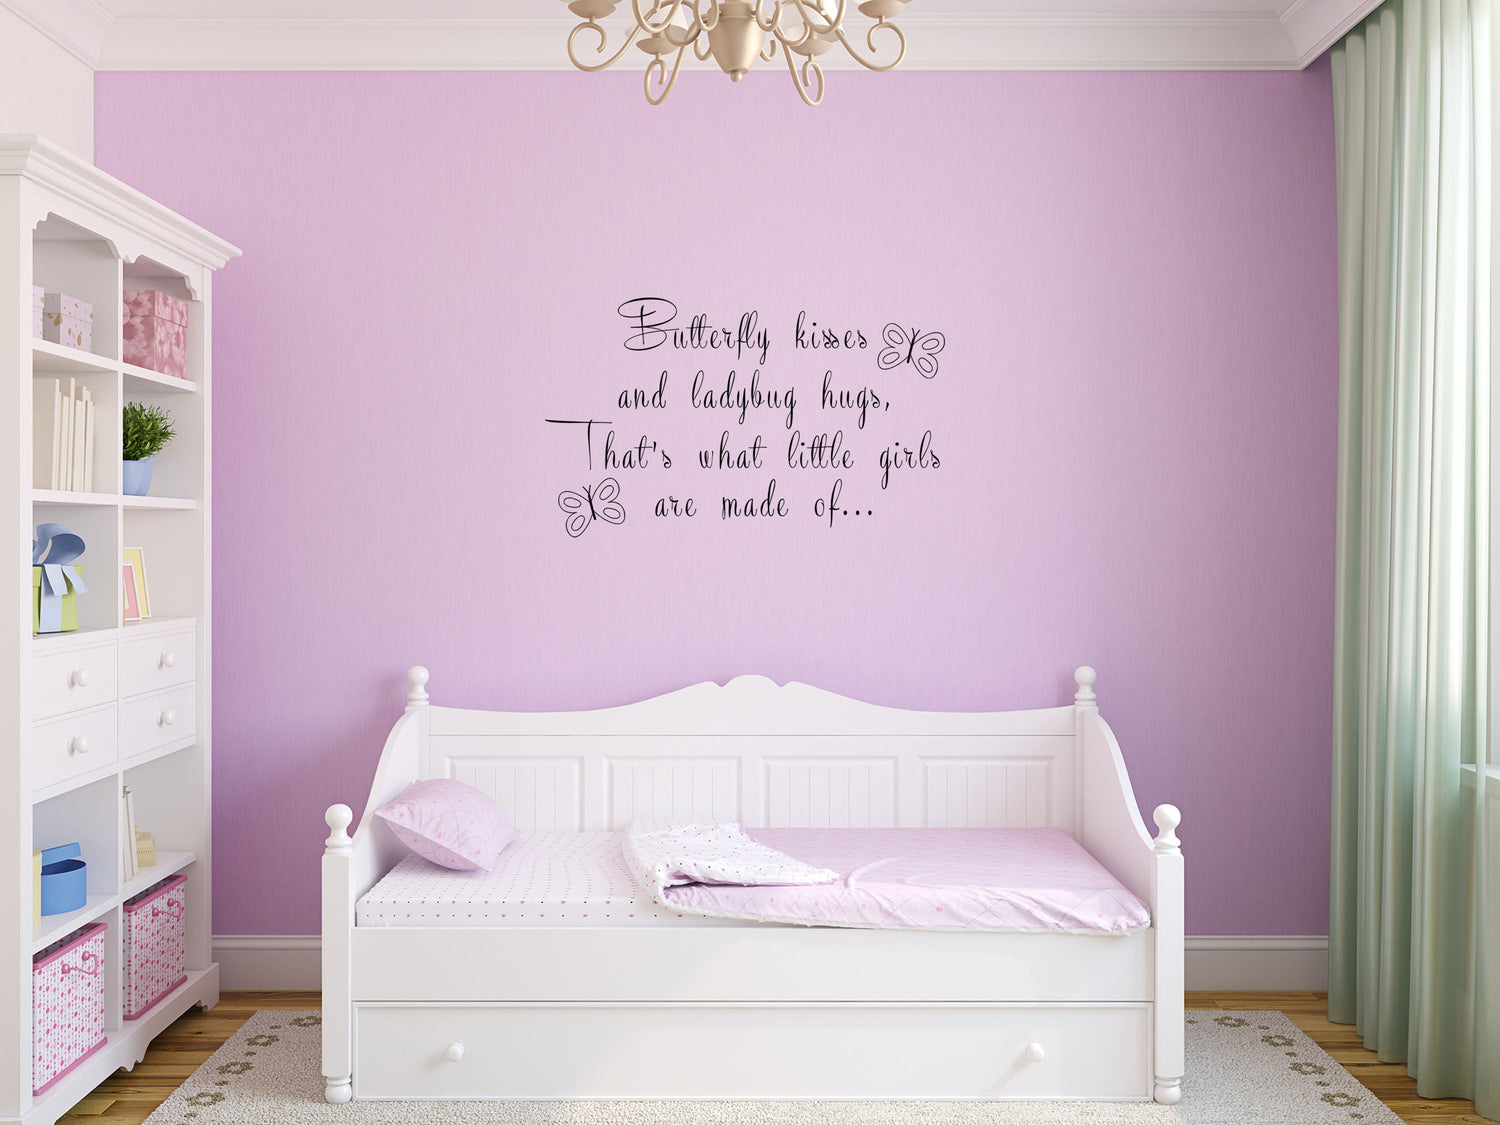 That's What Little Girls Are Made Of Butterfly Kisses - Inspirational Wall Signs Vinyl Wall Decal Inspirational Wall Signs 